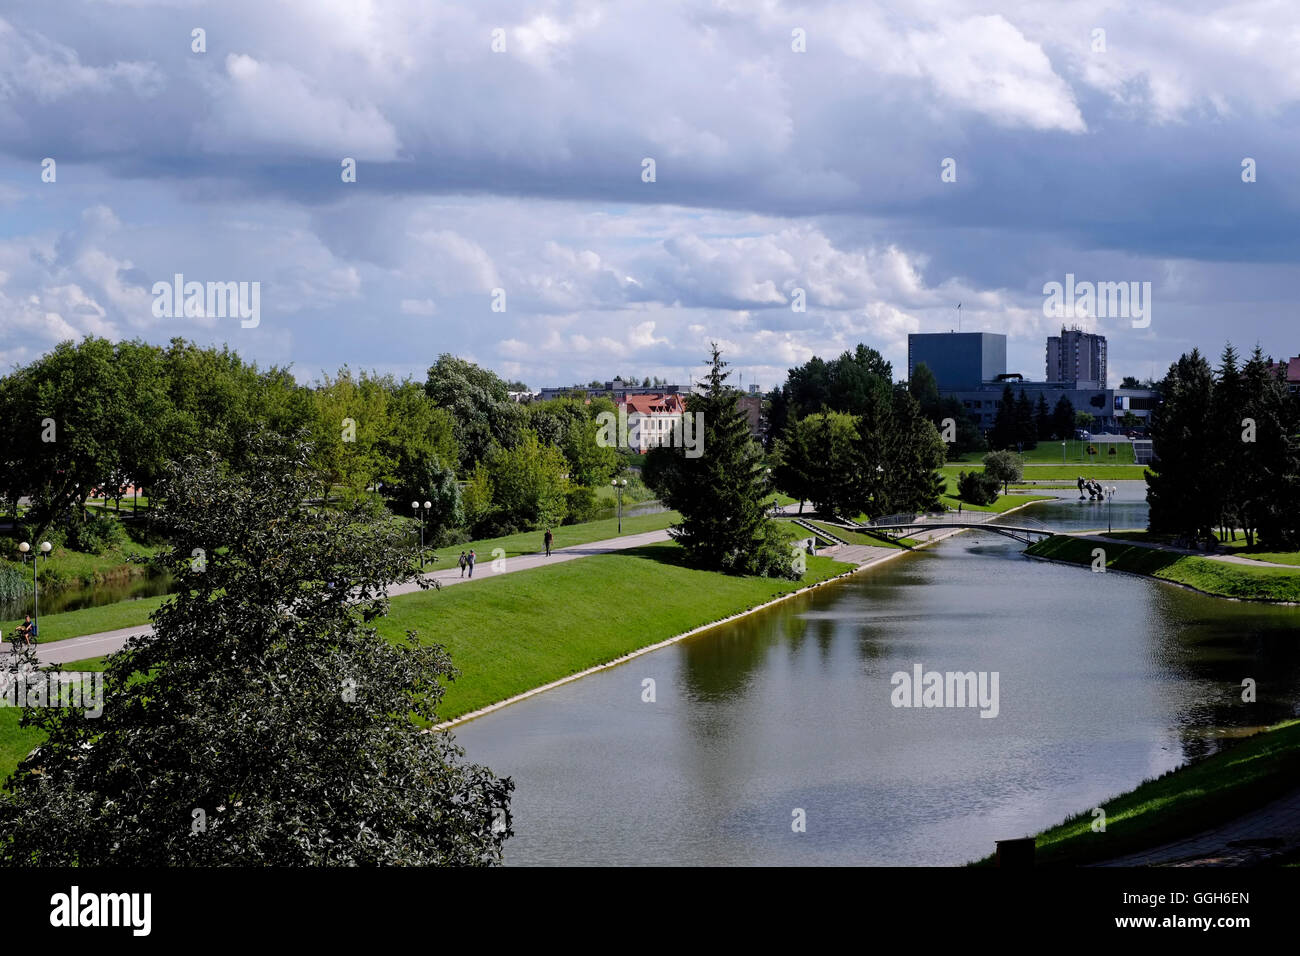 View of the Senvage lake (Billabong) park in the town of Panevezys in Lithuana. The town is still widely known, if indirectly, in the Jewish world, for the eponymous Ponevezh Yeshiva. Stock Photo